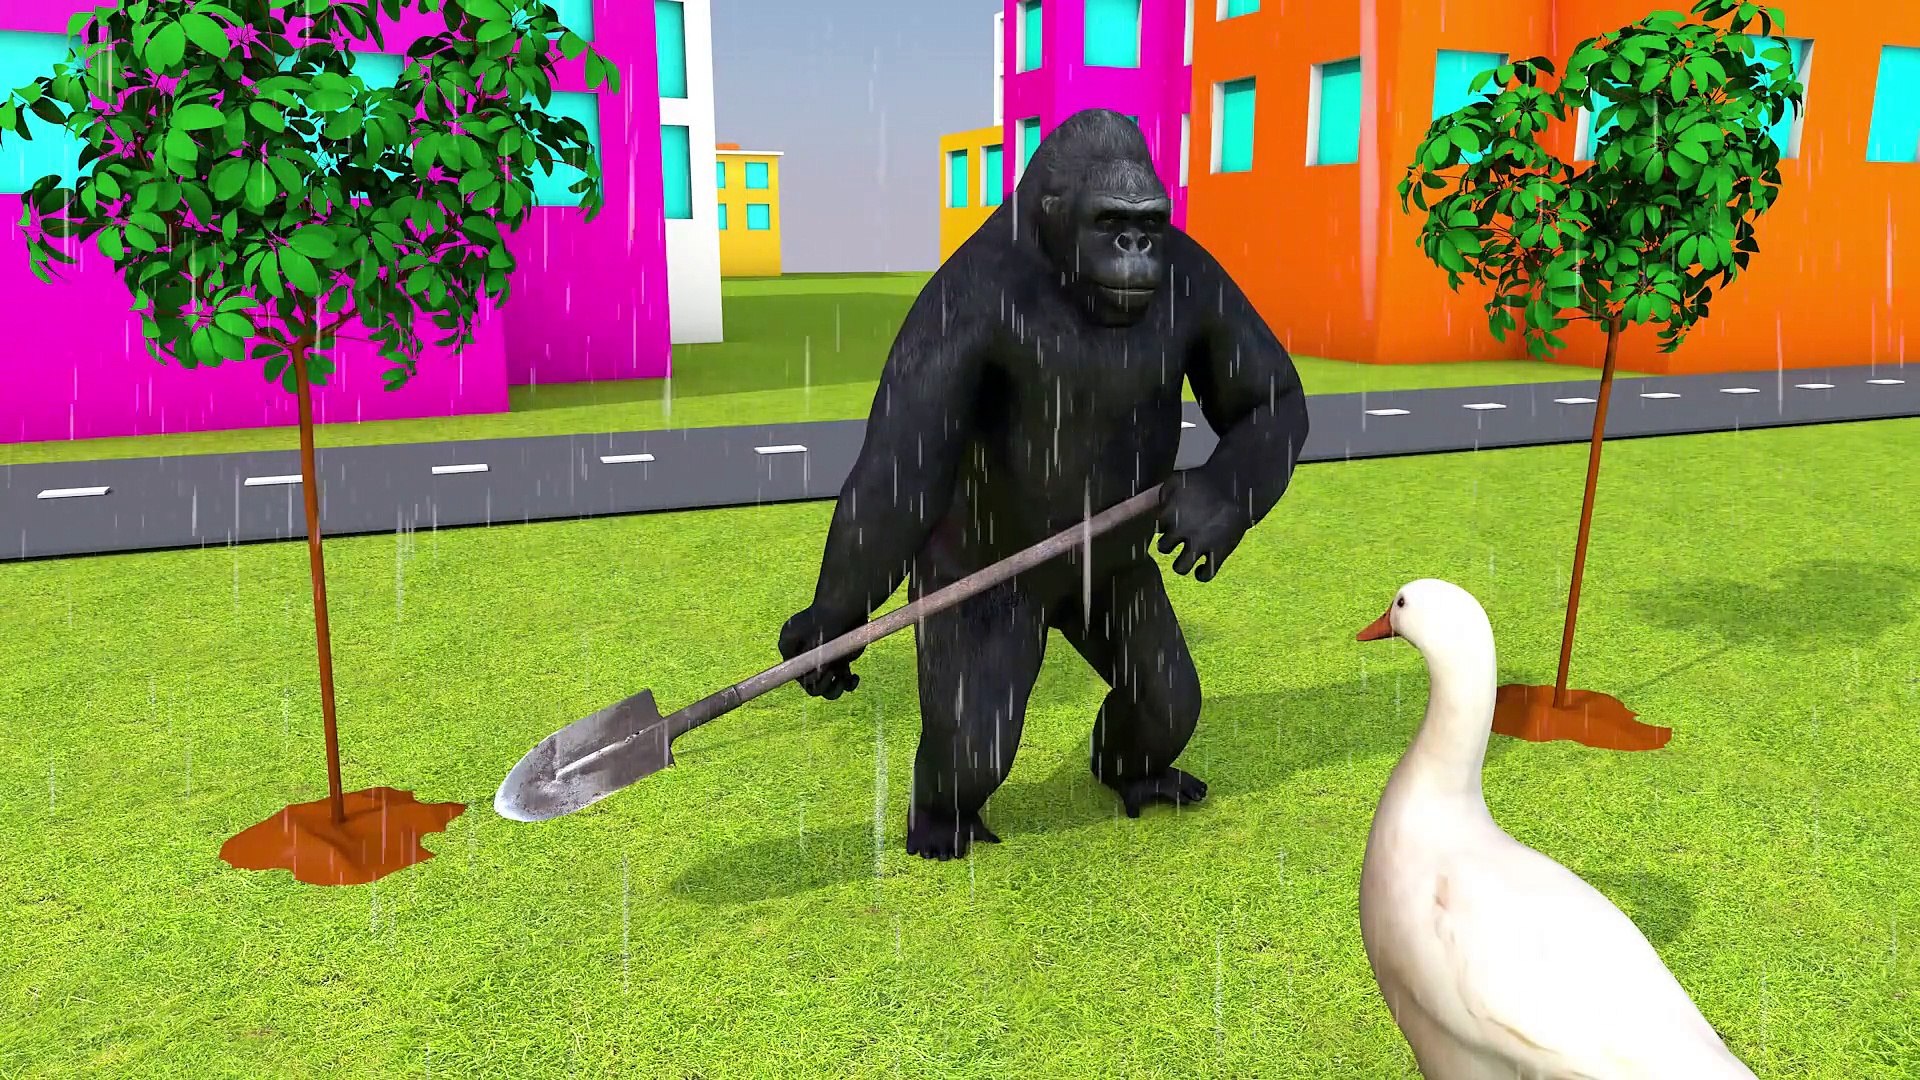 Gorilla and Ducks Video for Kids - video Dailymotion